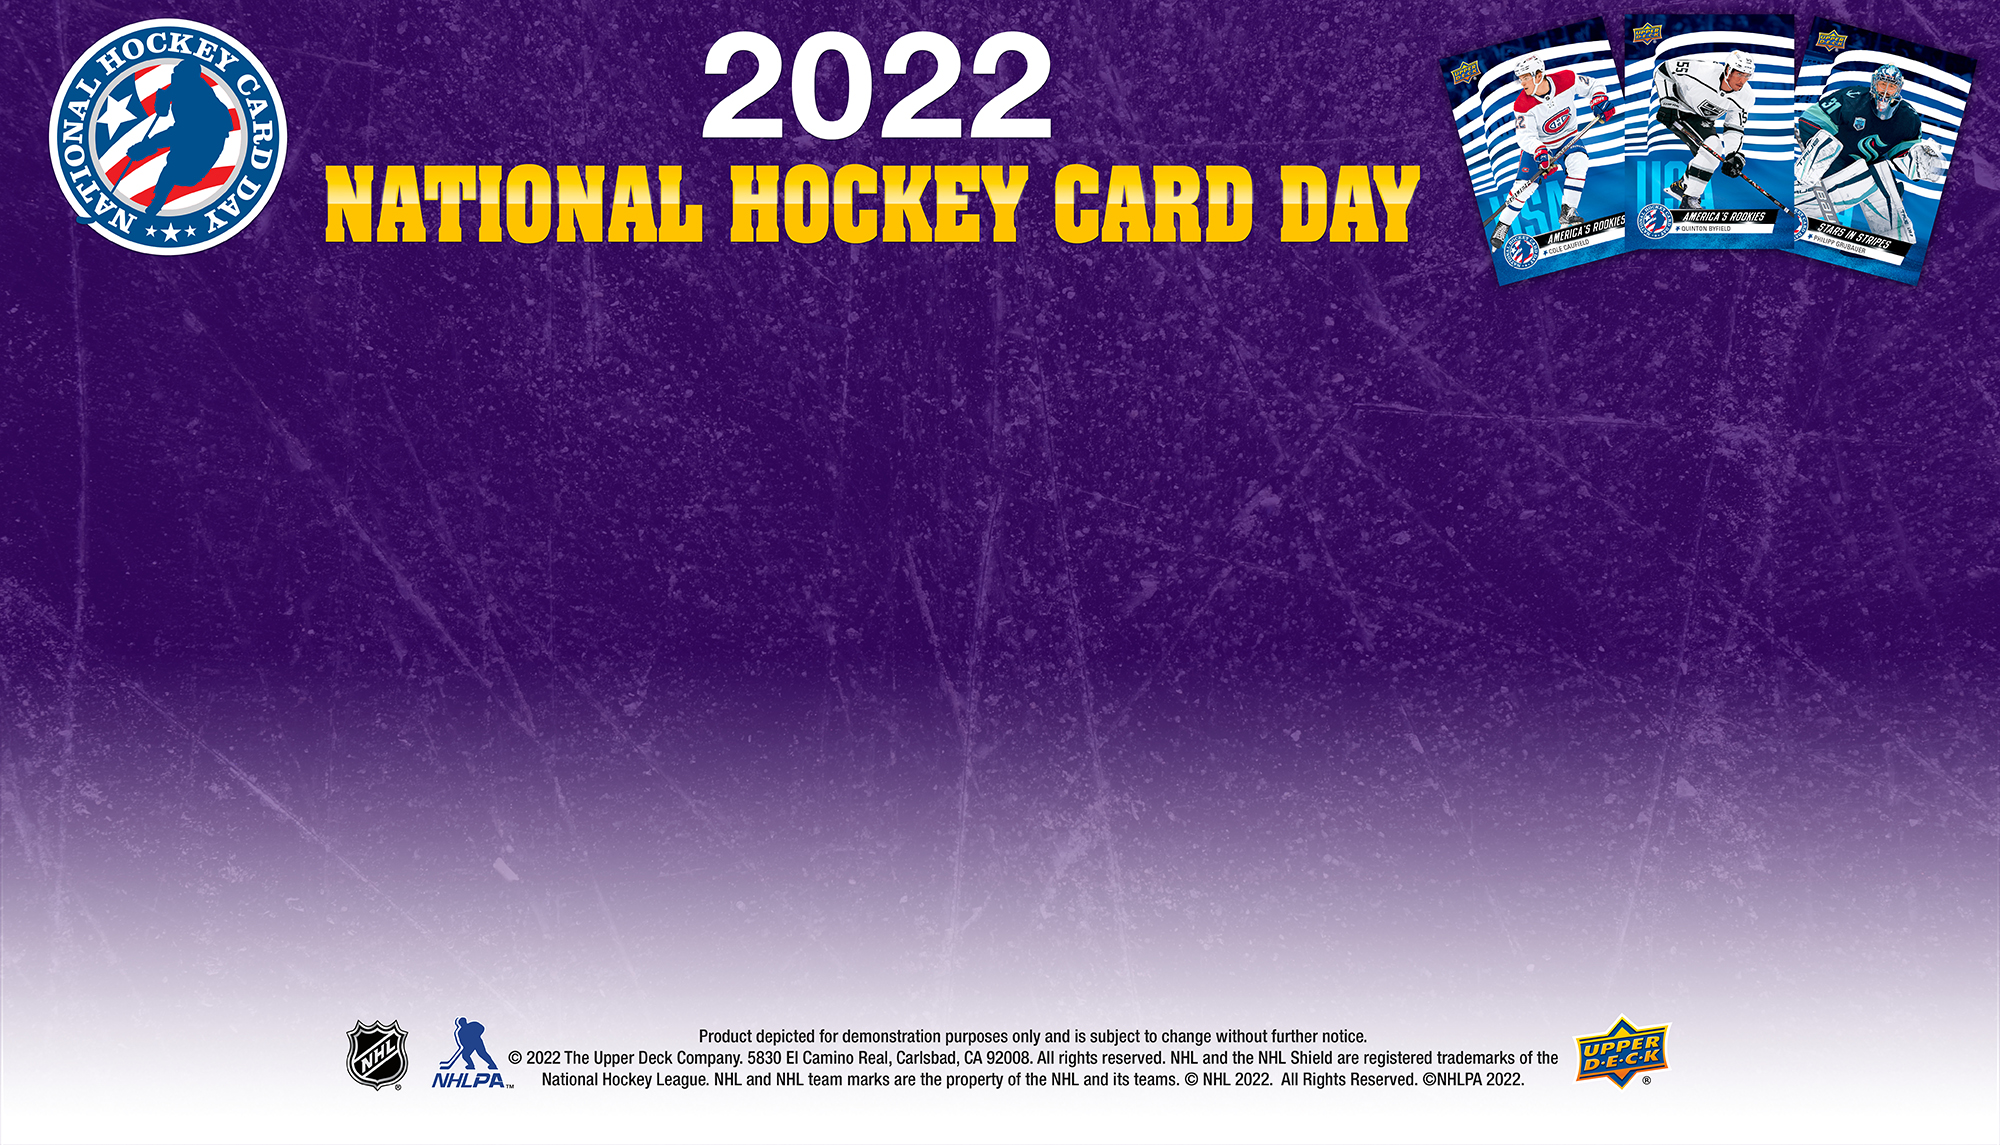 2022 National Hockey Card Day presented by Upper Deck, International page